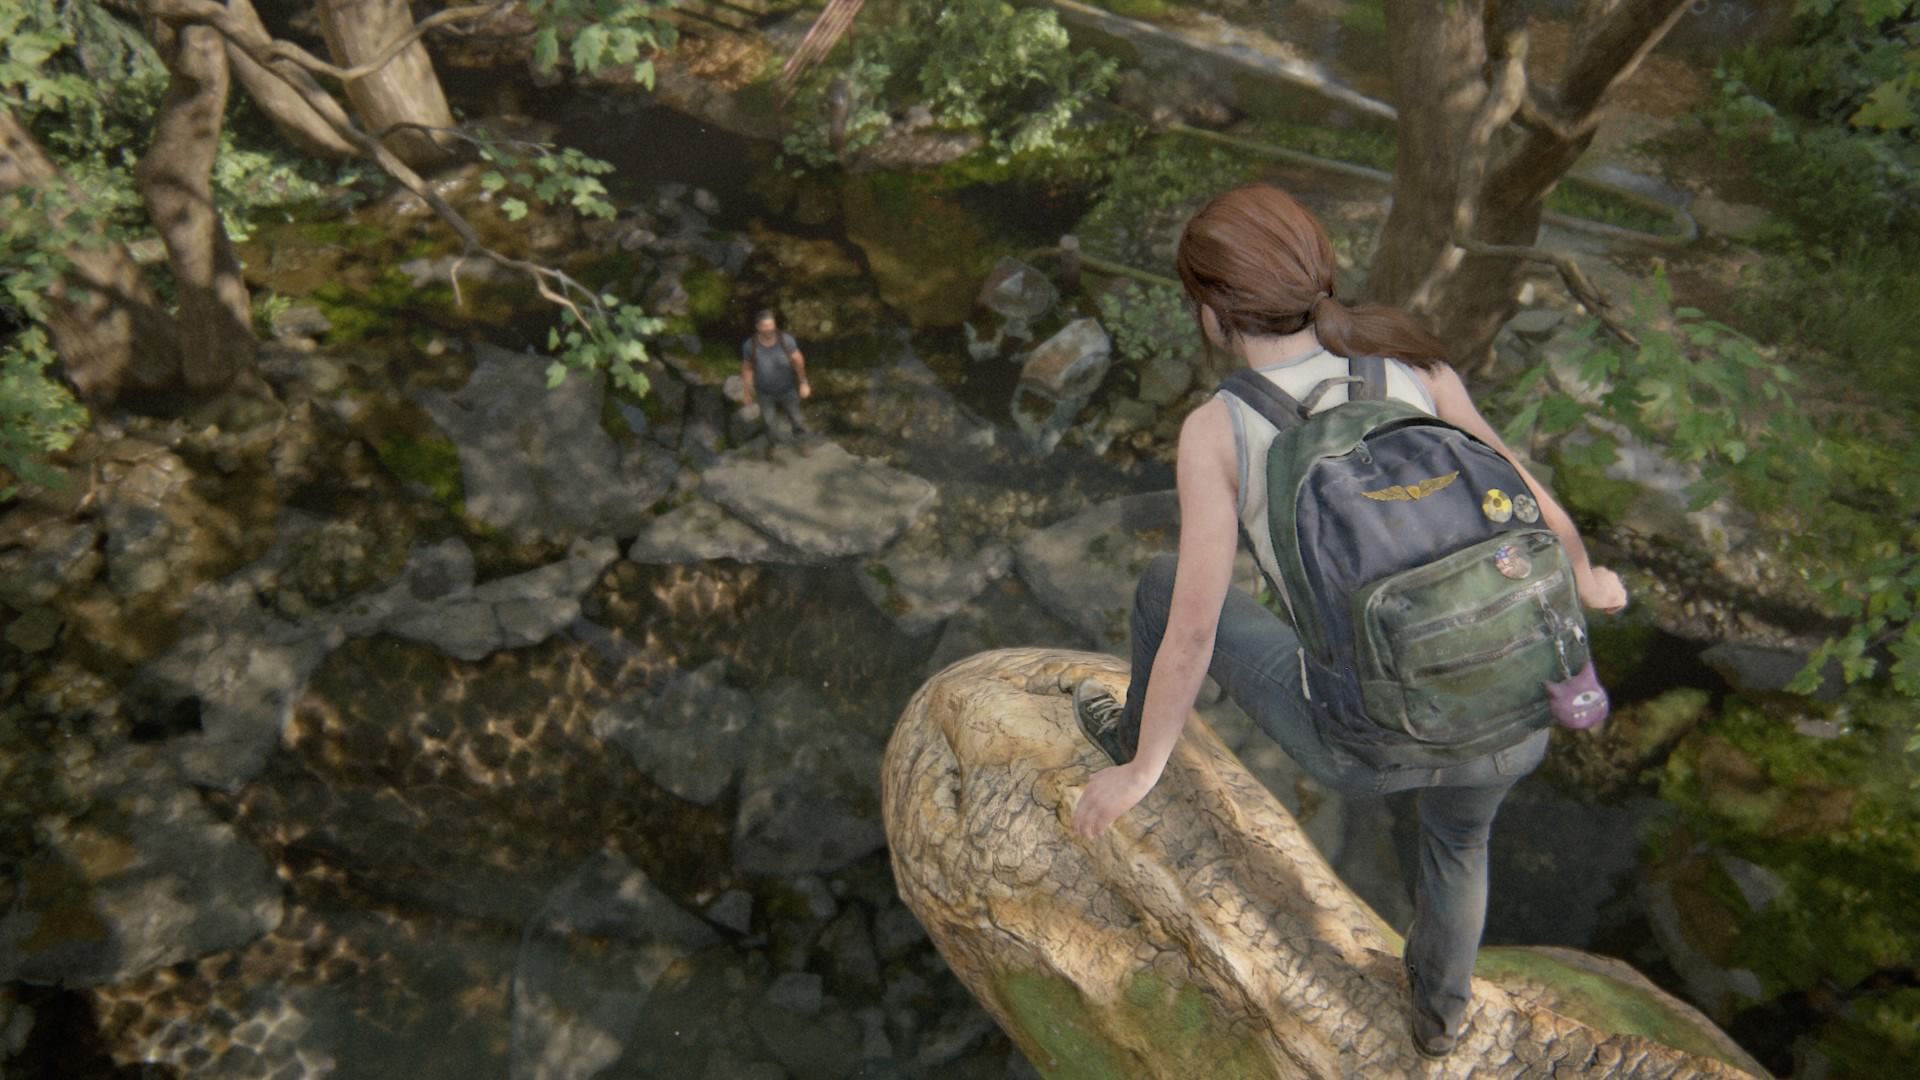 Naughty Dog Drops Tips For Taking The Most Awesome Photos In The Last Of Us 2